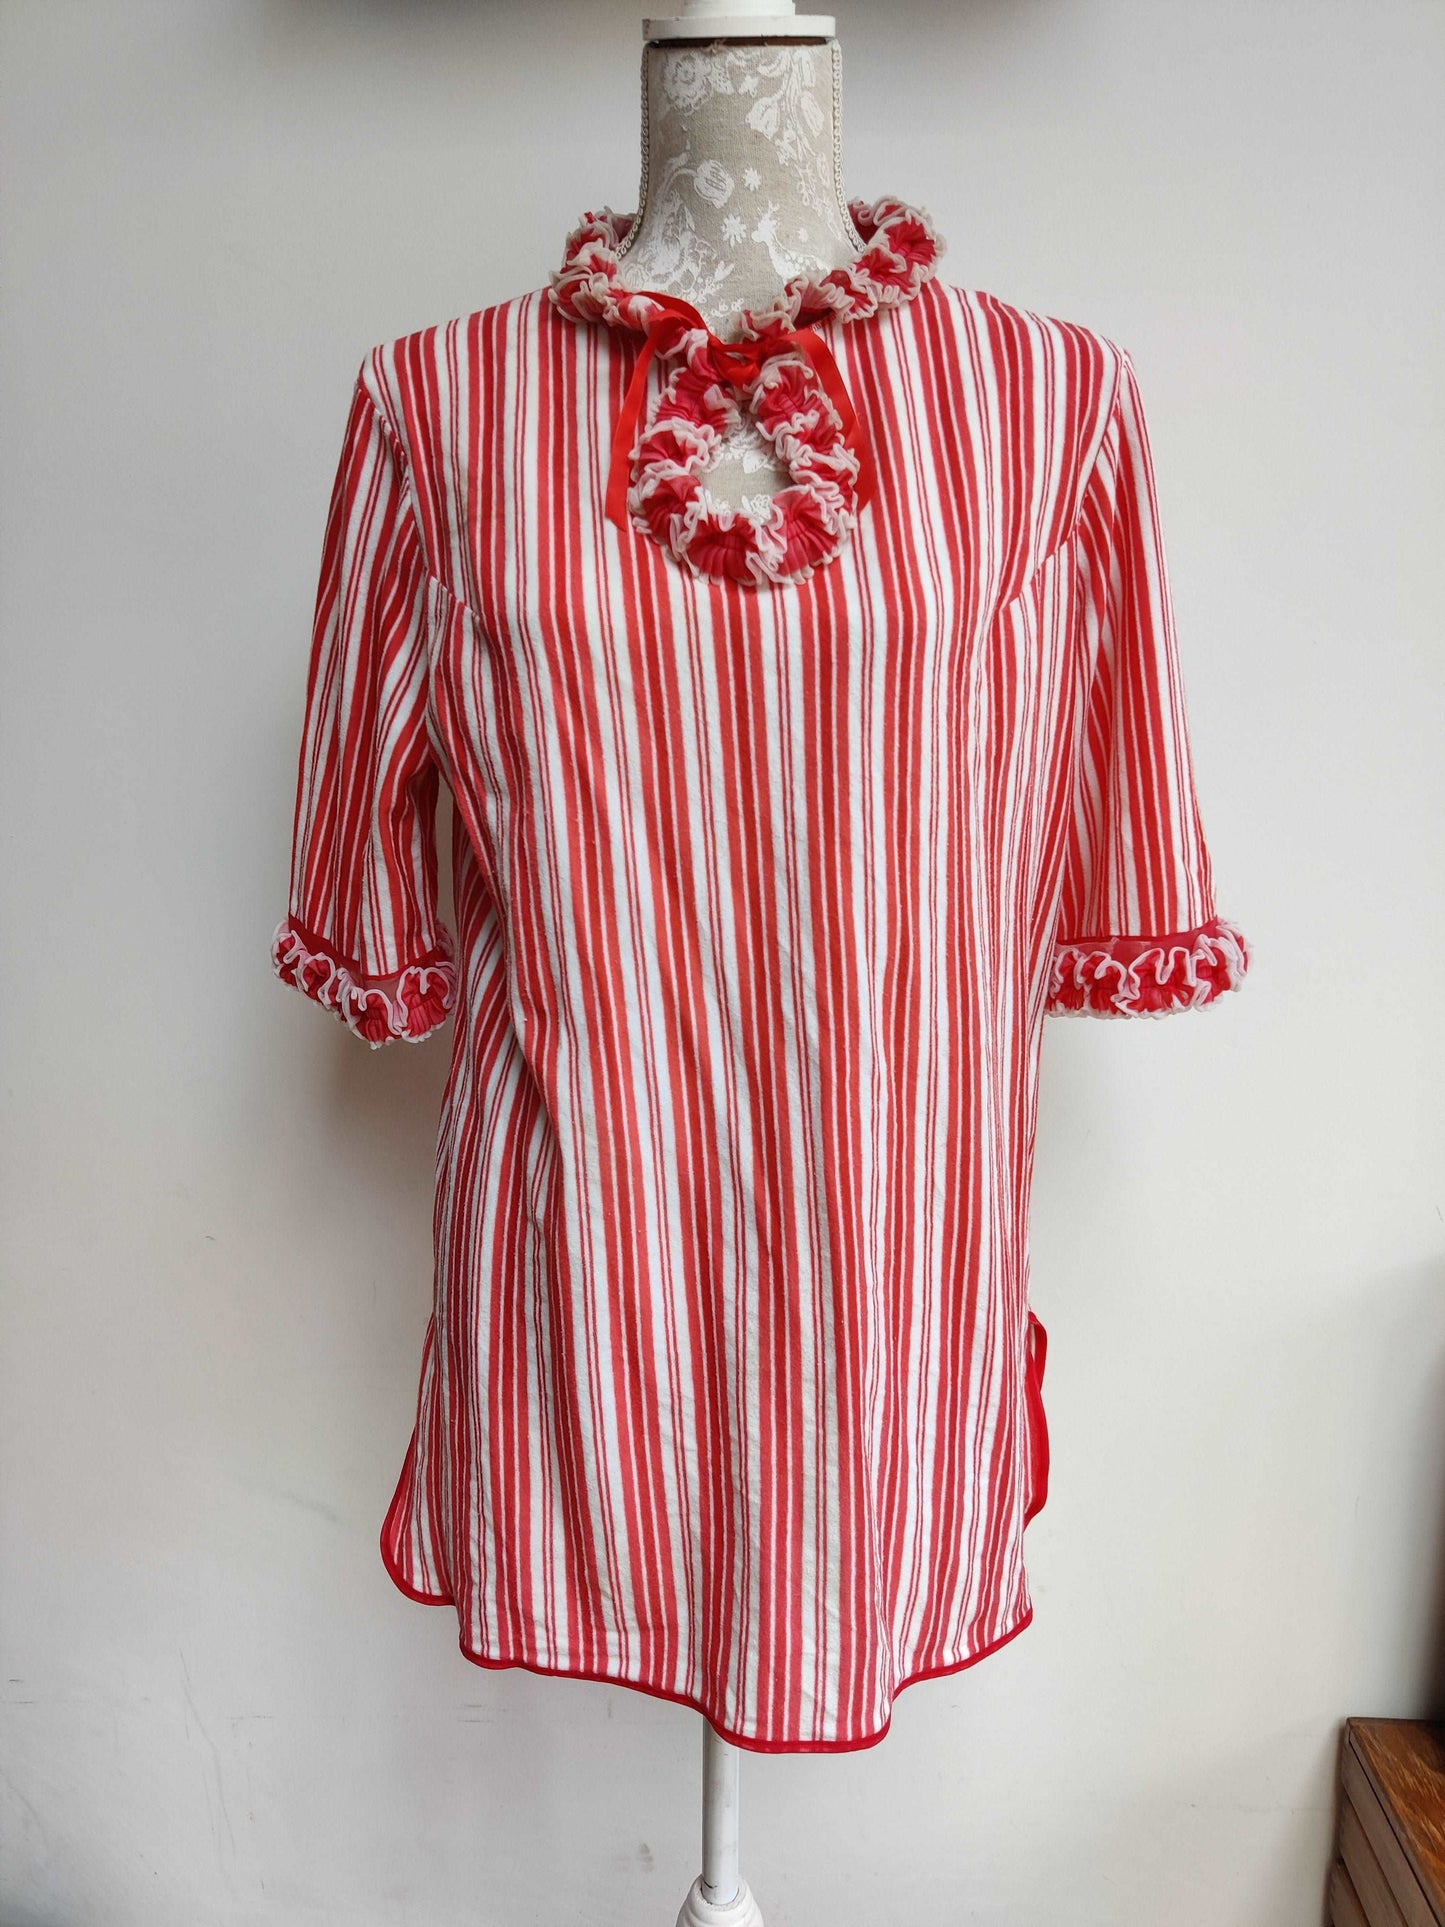 Fabulous coral stripe vintage frill smock top.